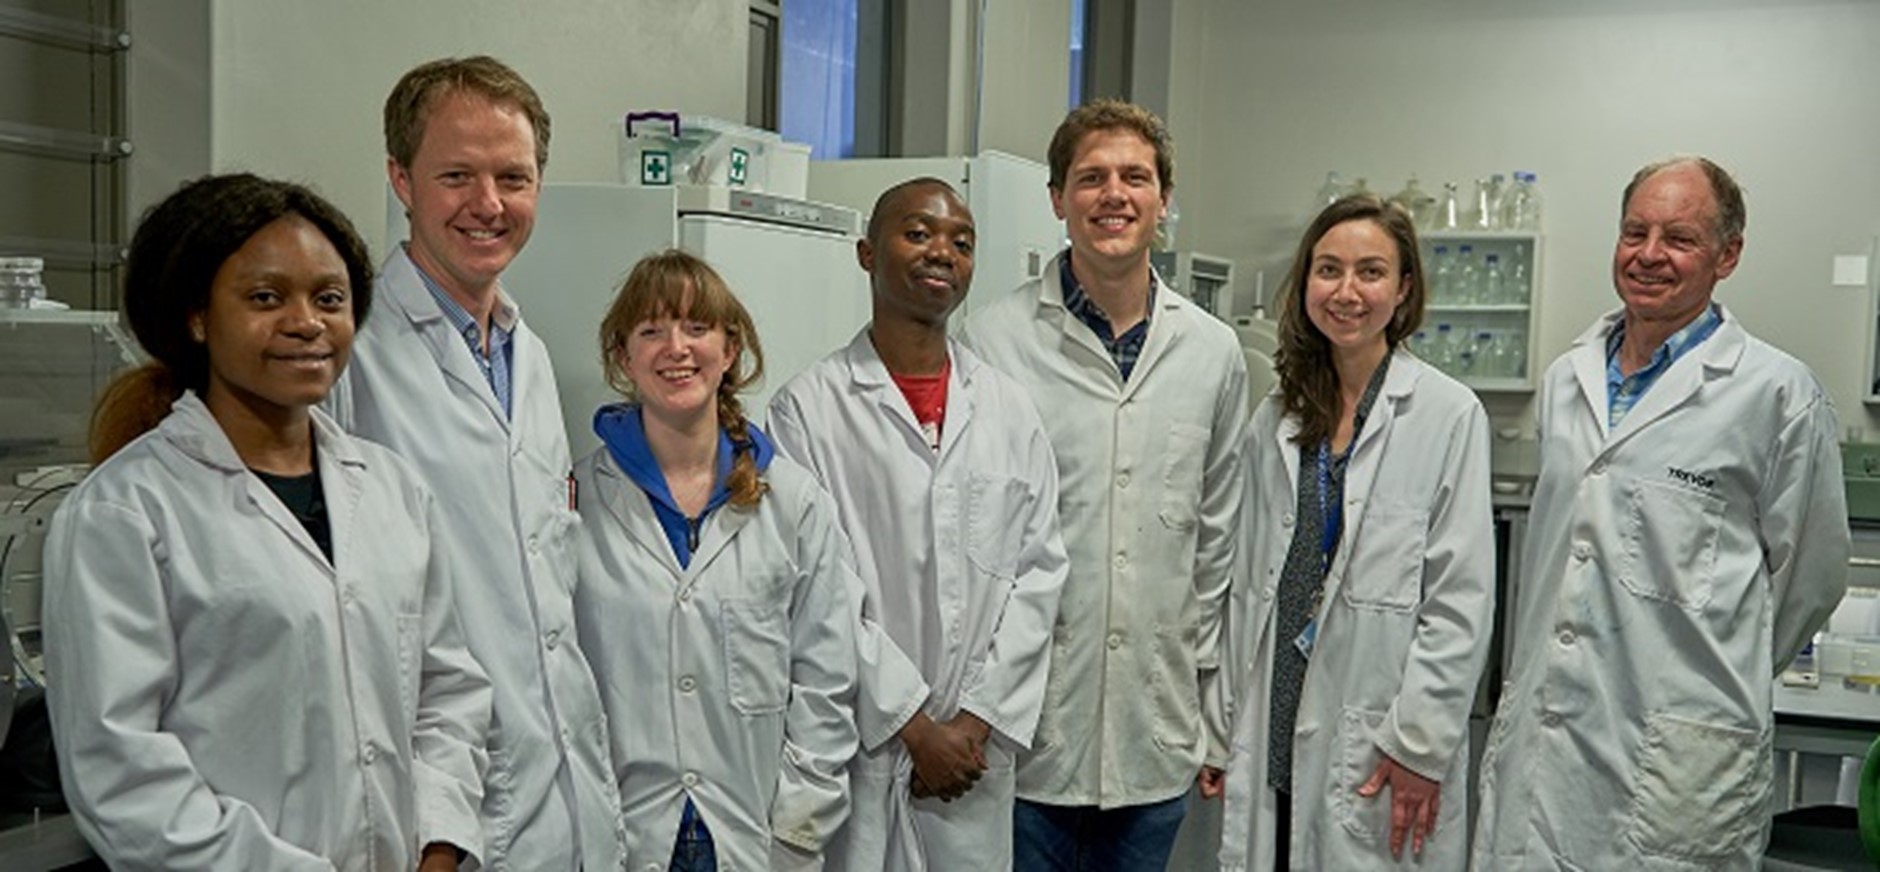 Dr Masamba and Prof. Trevor Sewell with colleagues collaborating with GCRF START at the Aaron Klug Centre for Imaging and Analysis at the University of Cape Town. In the picture from left to right: Dr Priscilla Masamba, Dr Jeremy Woodward, Melissa Marx, Dr Mulelu, Dr Philip Venter, Dr Lizelle Lubbe, Professor Trevor Sewell. Photo Credit: Rebekka Stredwick. ©Diamond Light Source.